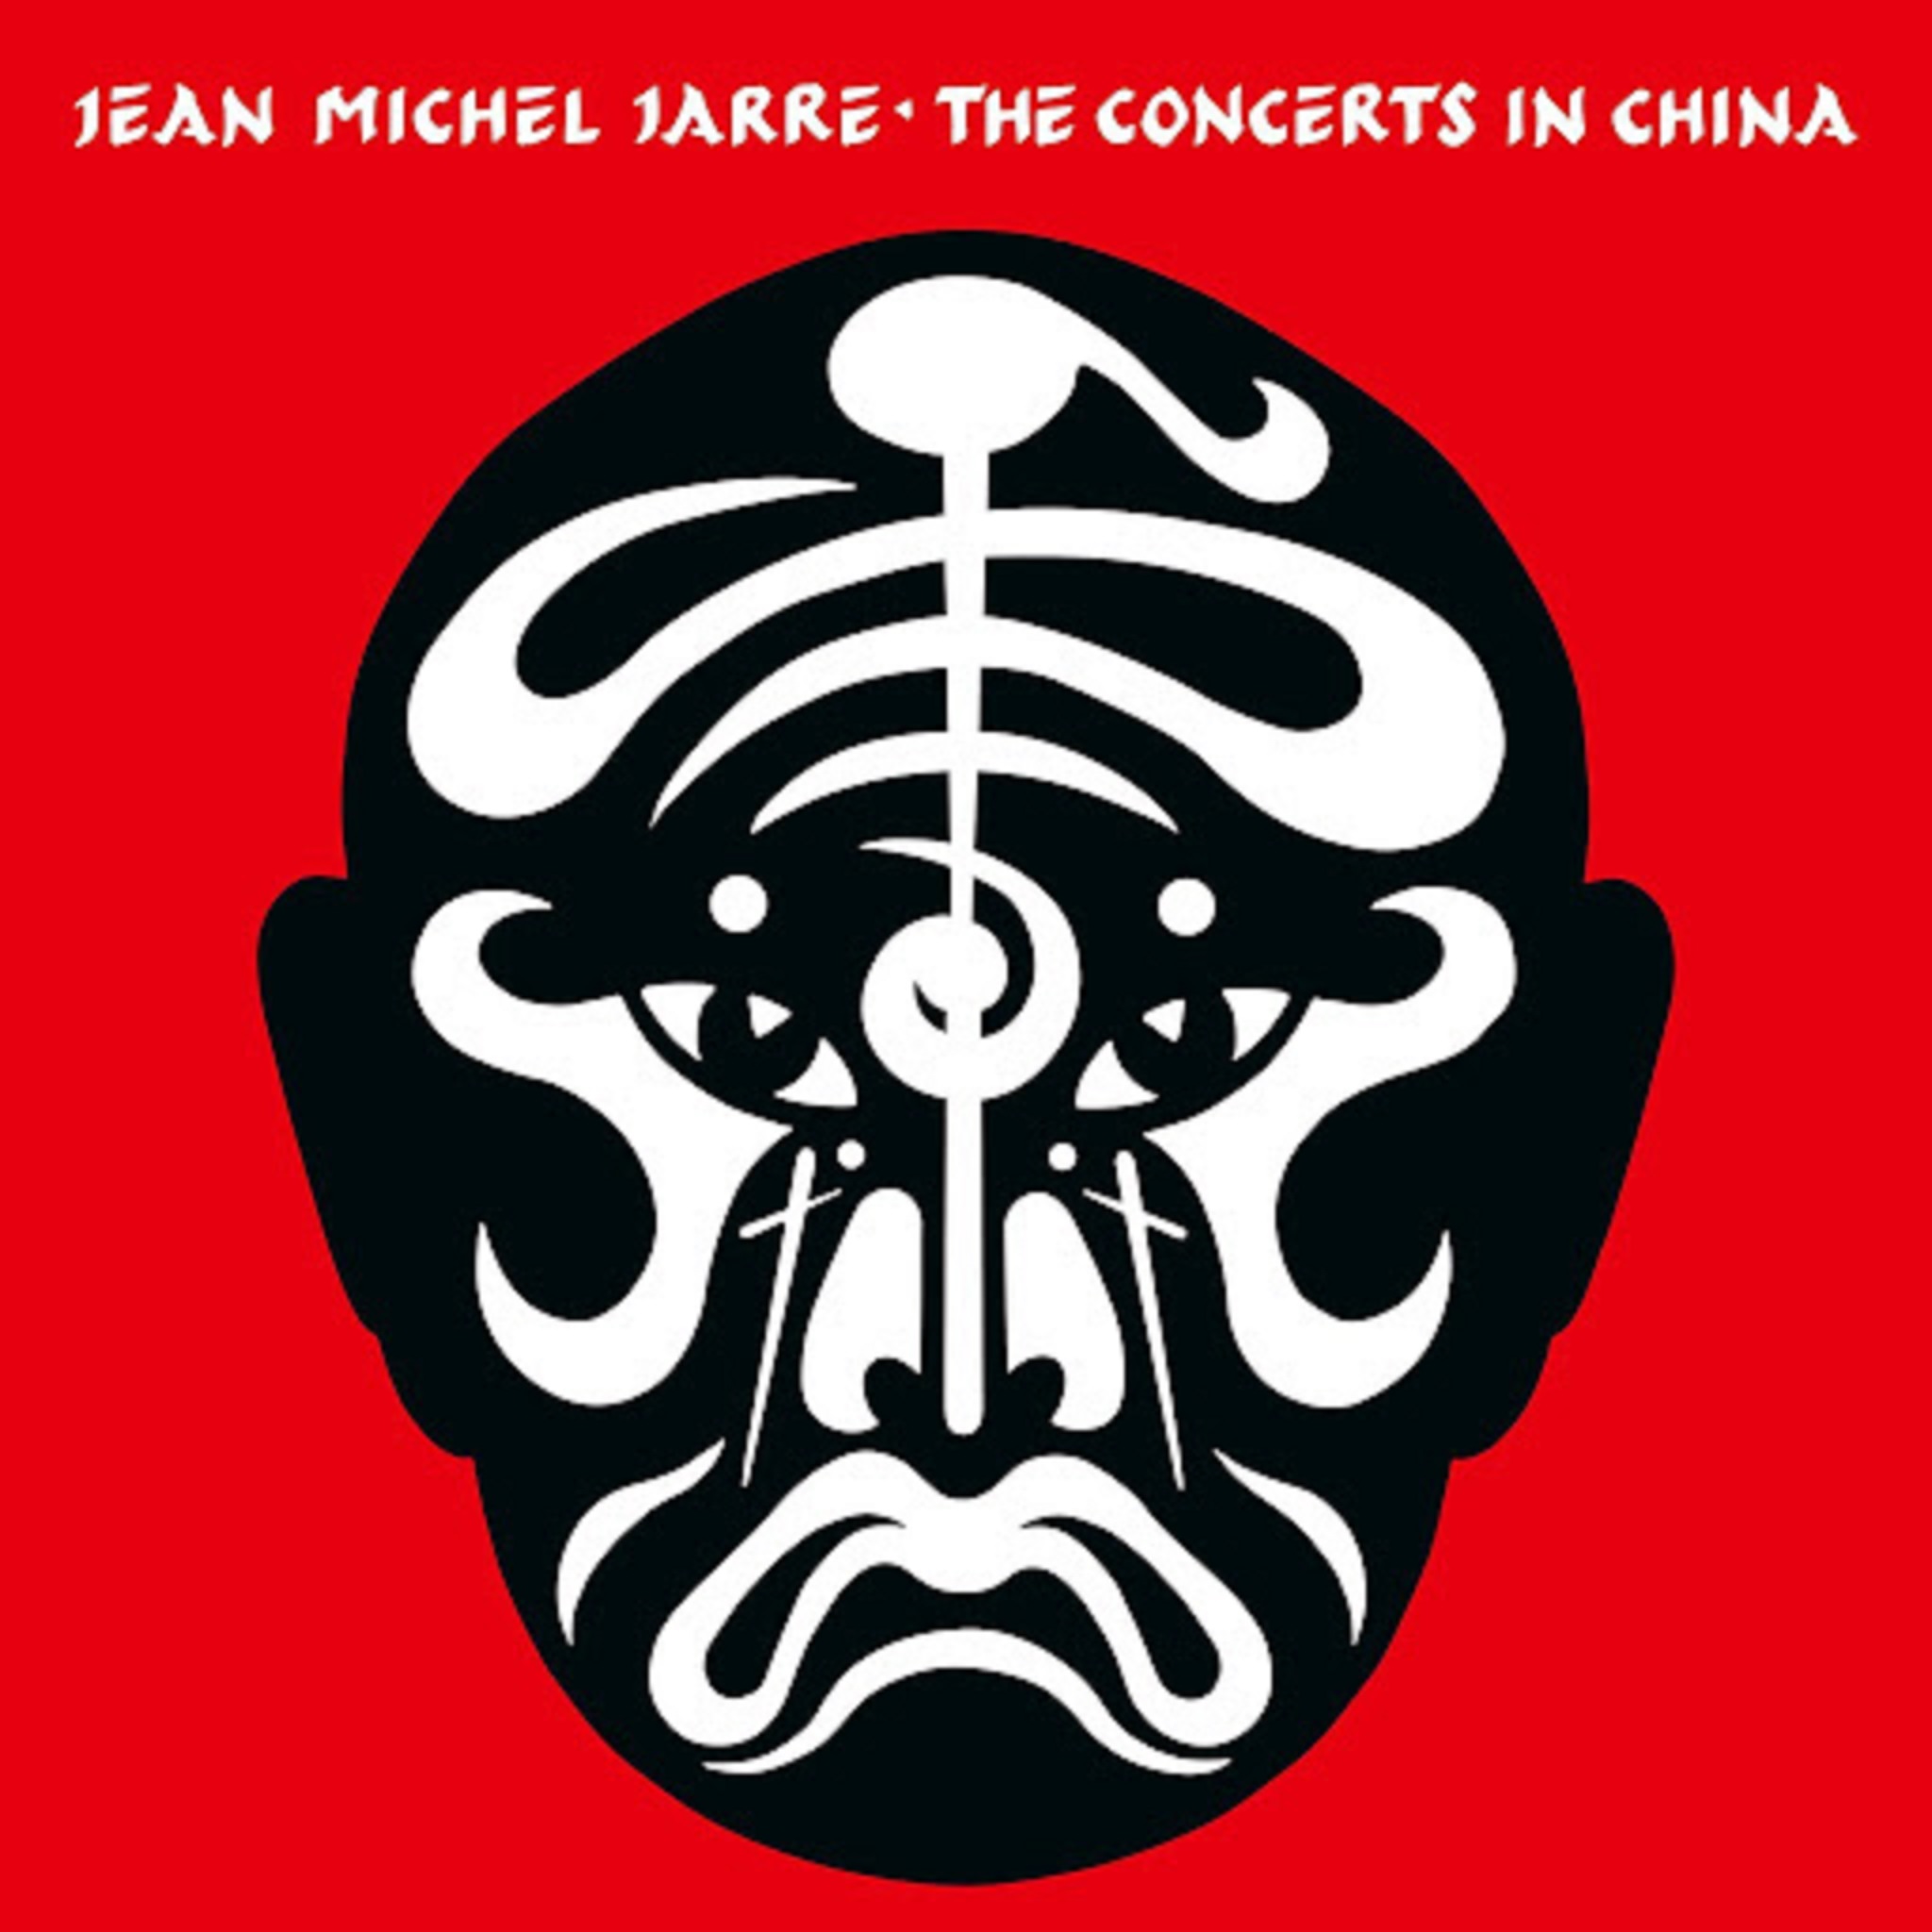 JEAN-MICHEL JARRE To Release 40th Anniversary Remastered Edition of ‘The Concerts In China’ November 25